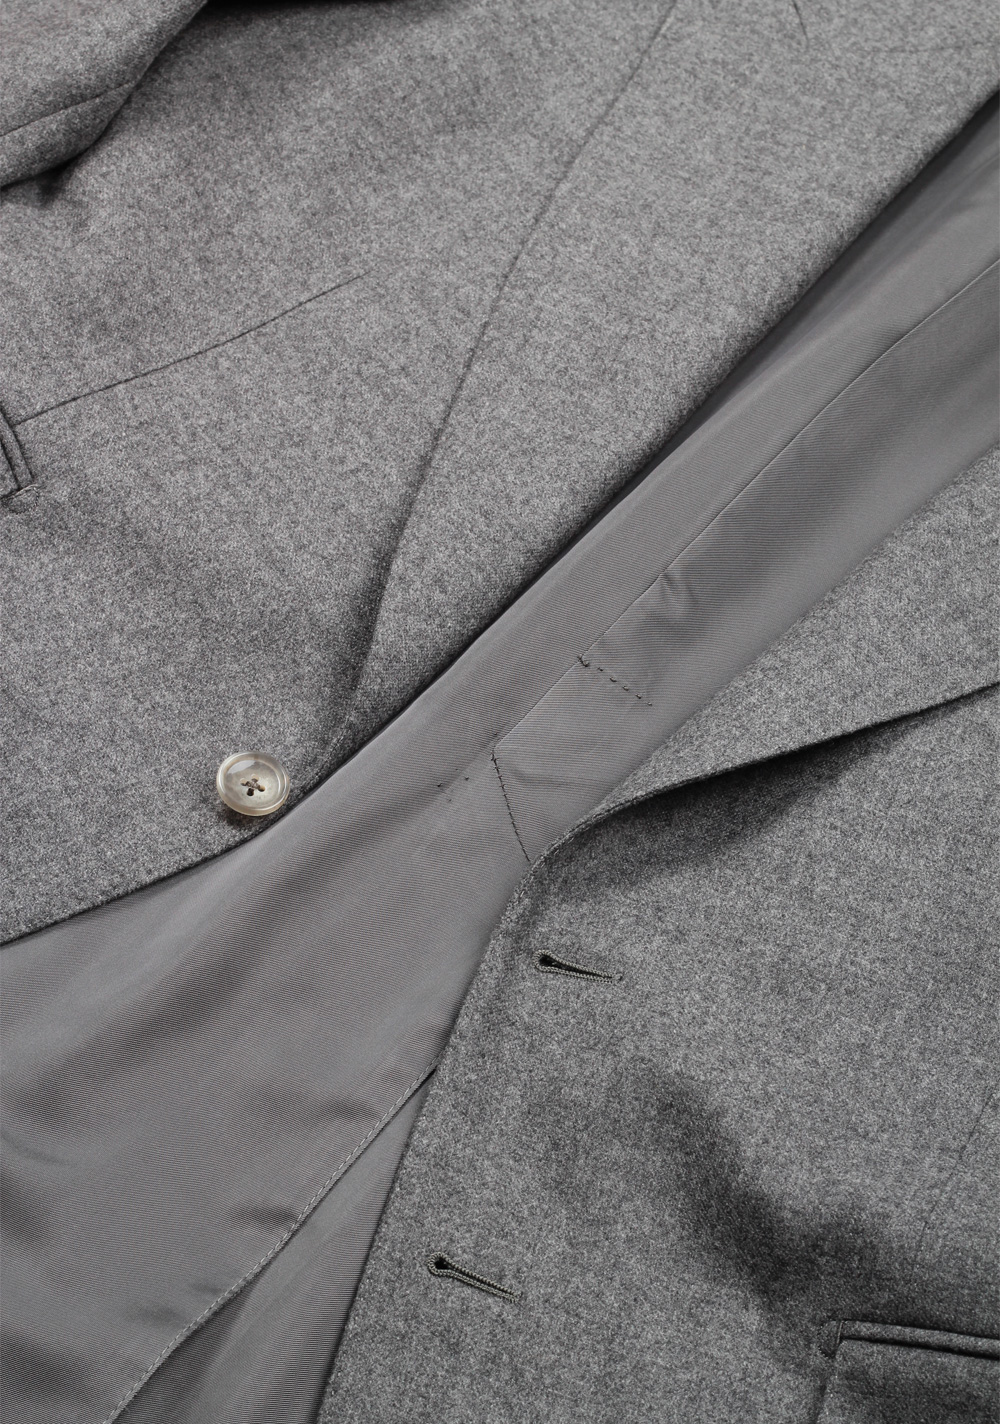 TOM FORD Shelton Gray Flannel Suit Size 50 / 40R U.S. In Wool | Costume Limité